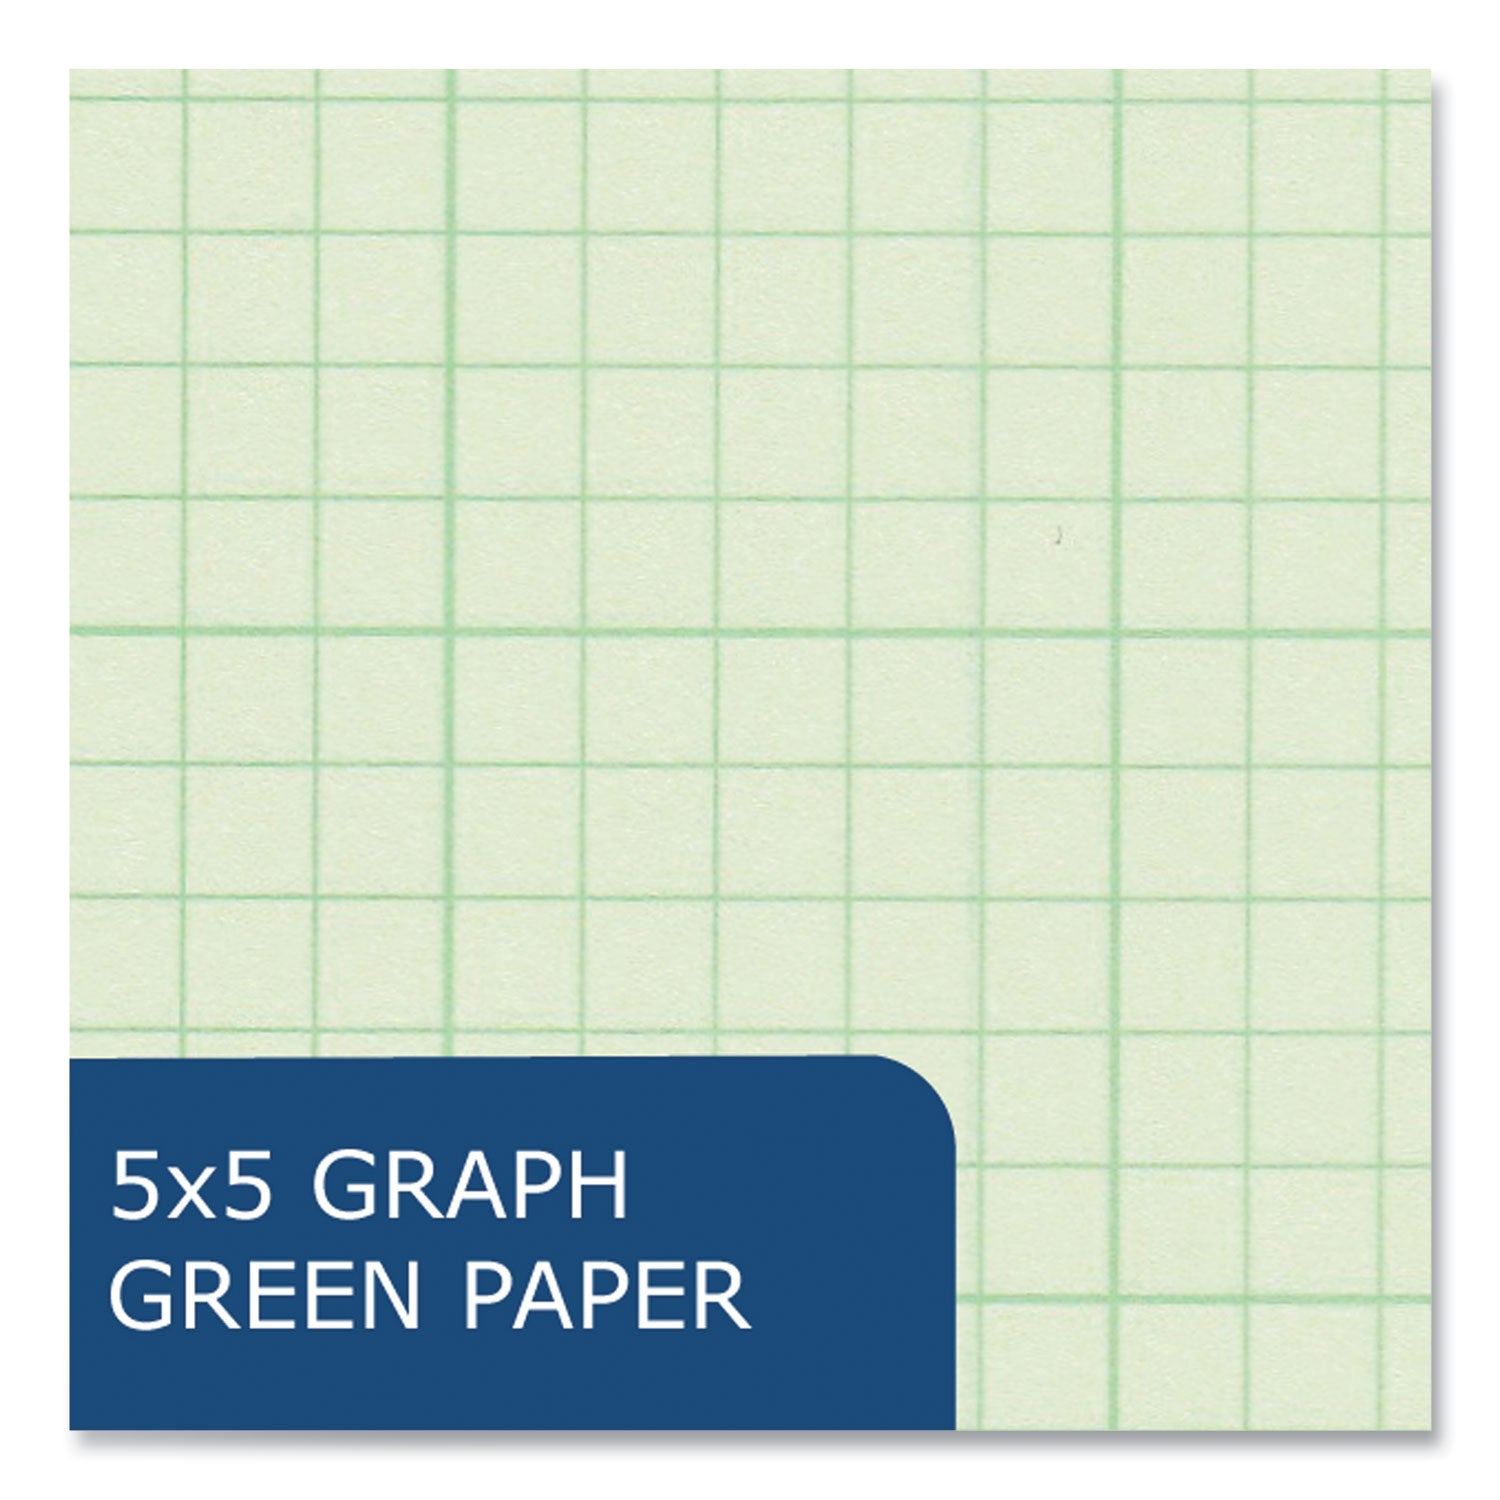 engineer-pad-05-margins-quad-rule-5-sq-in-1-sq-in-200-lt-green-85x11-sheets-pad-12-ct-ships-in-4-6-business-days_roa95389cs - 5